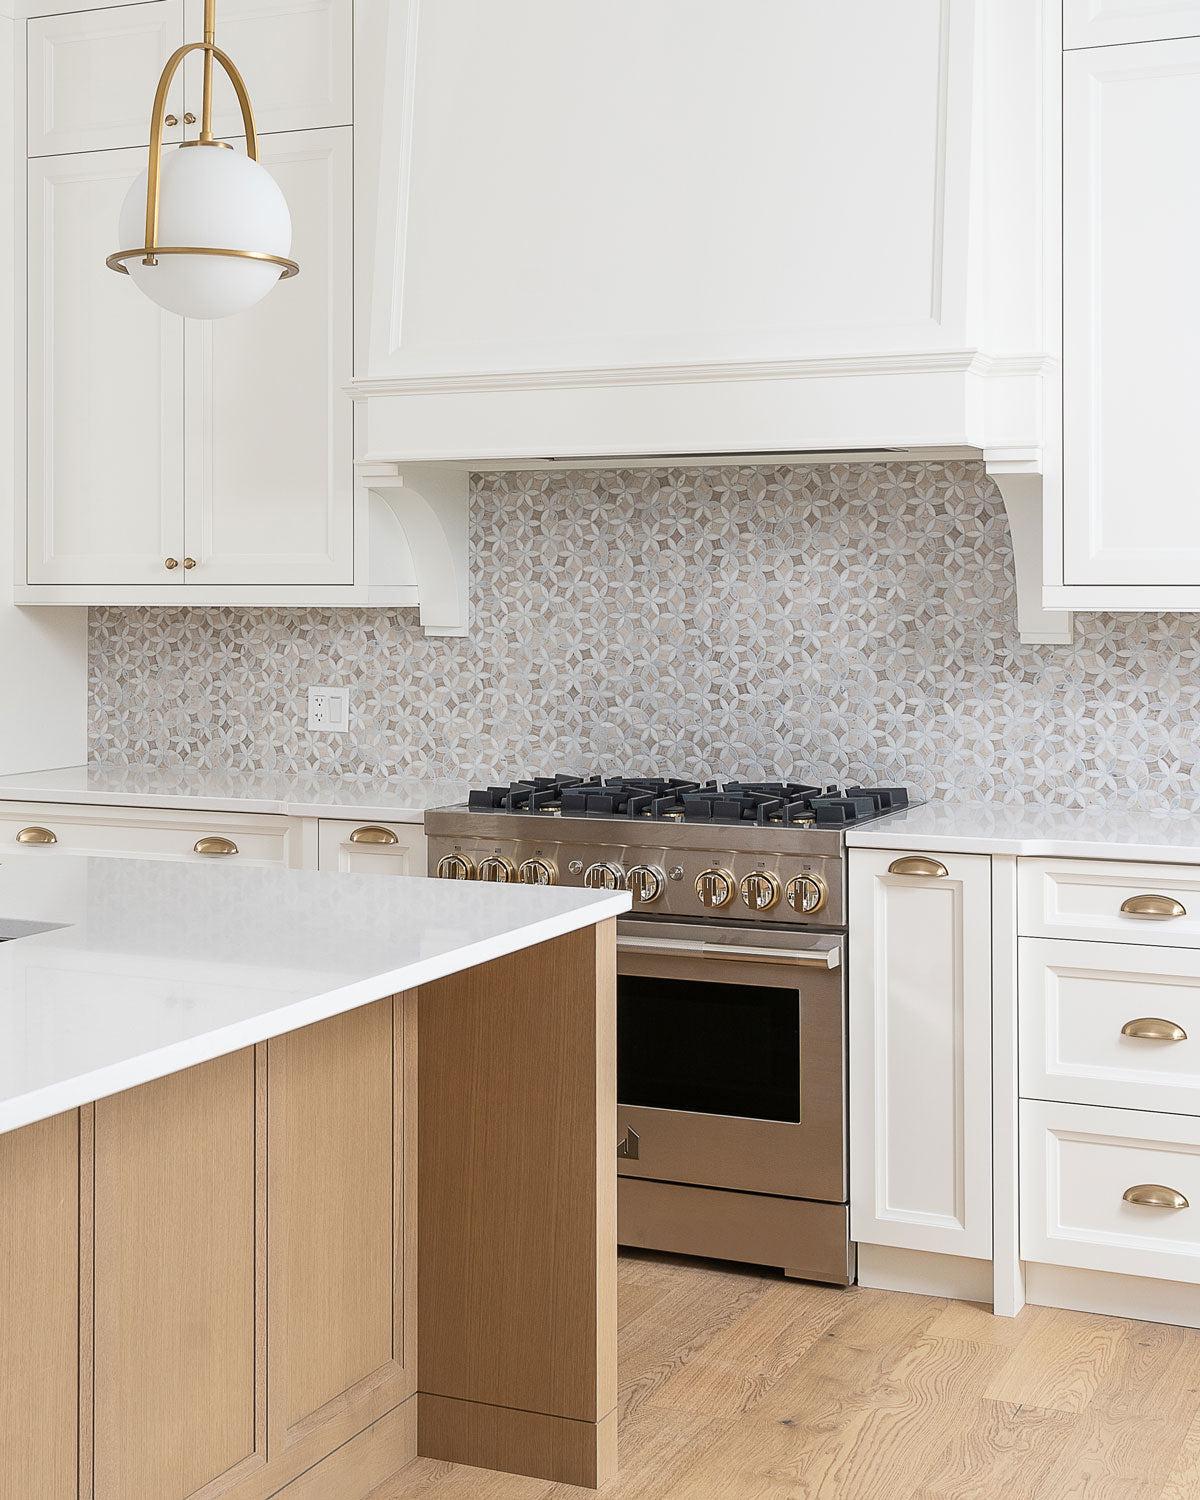 Custom Built White and Wood Kitchen with Roman Flower Wooden Beige And Carrara Marble Mosaic Tile Backsplash